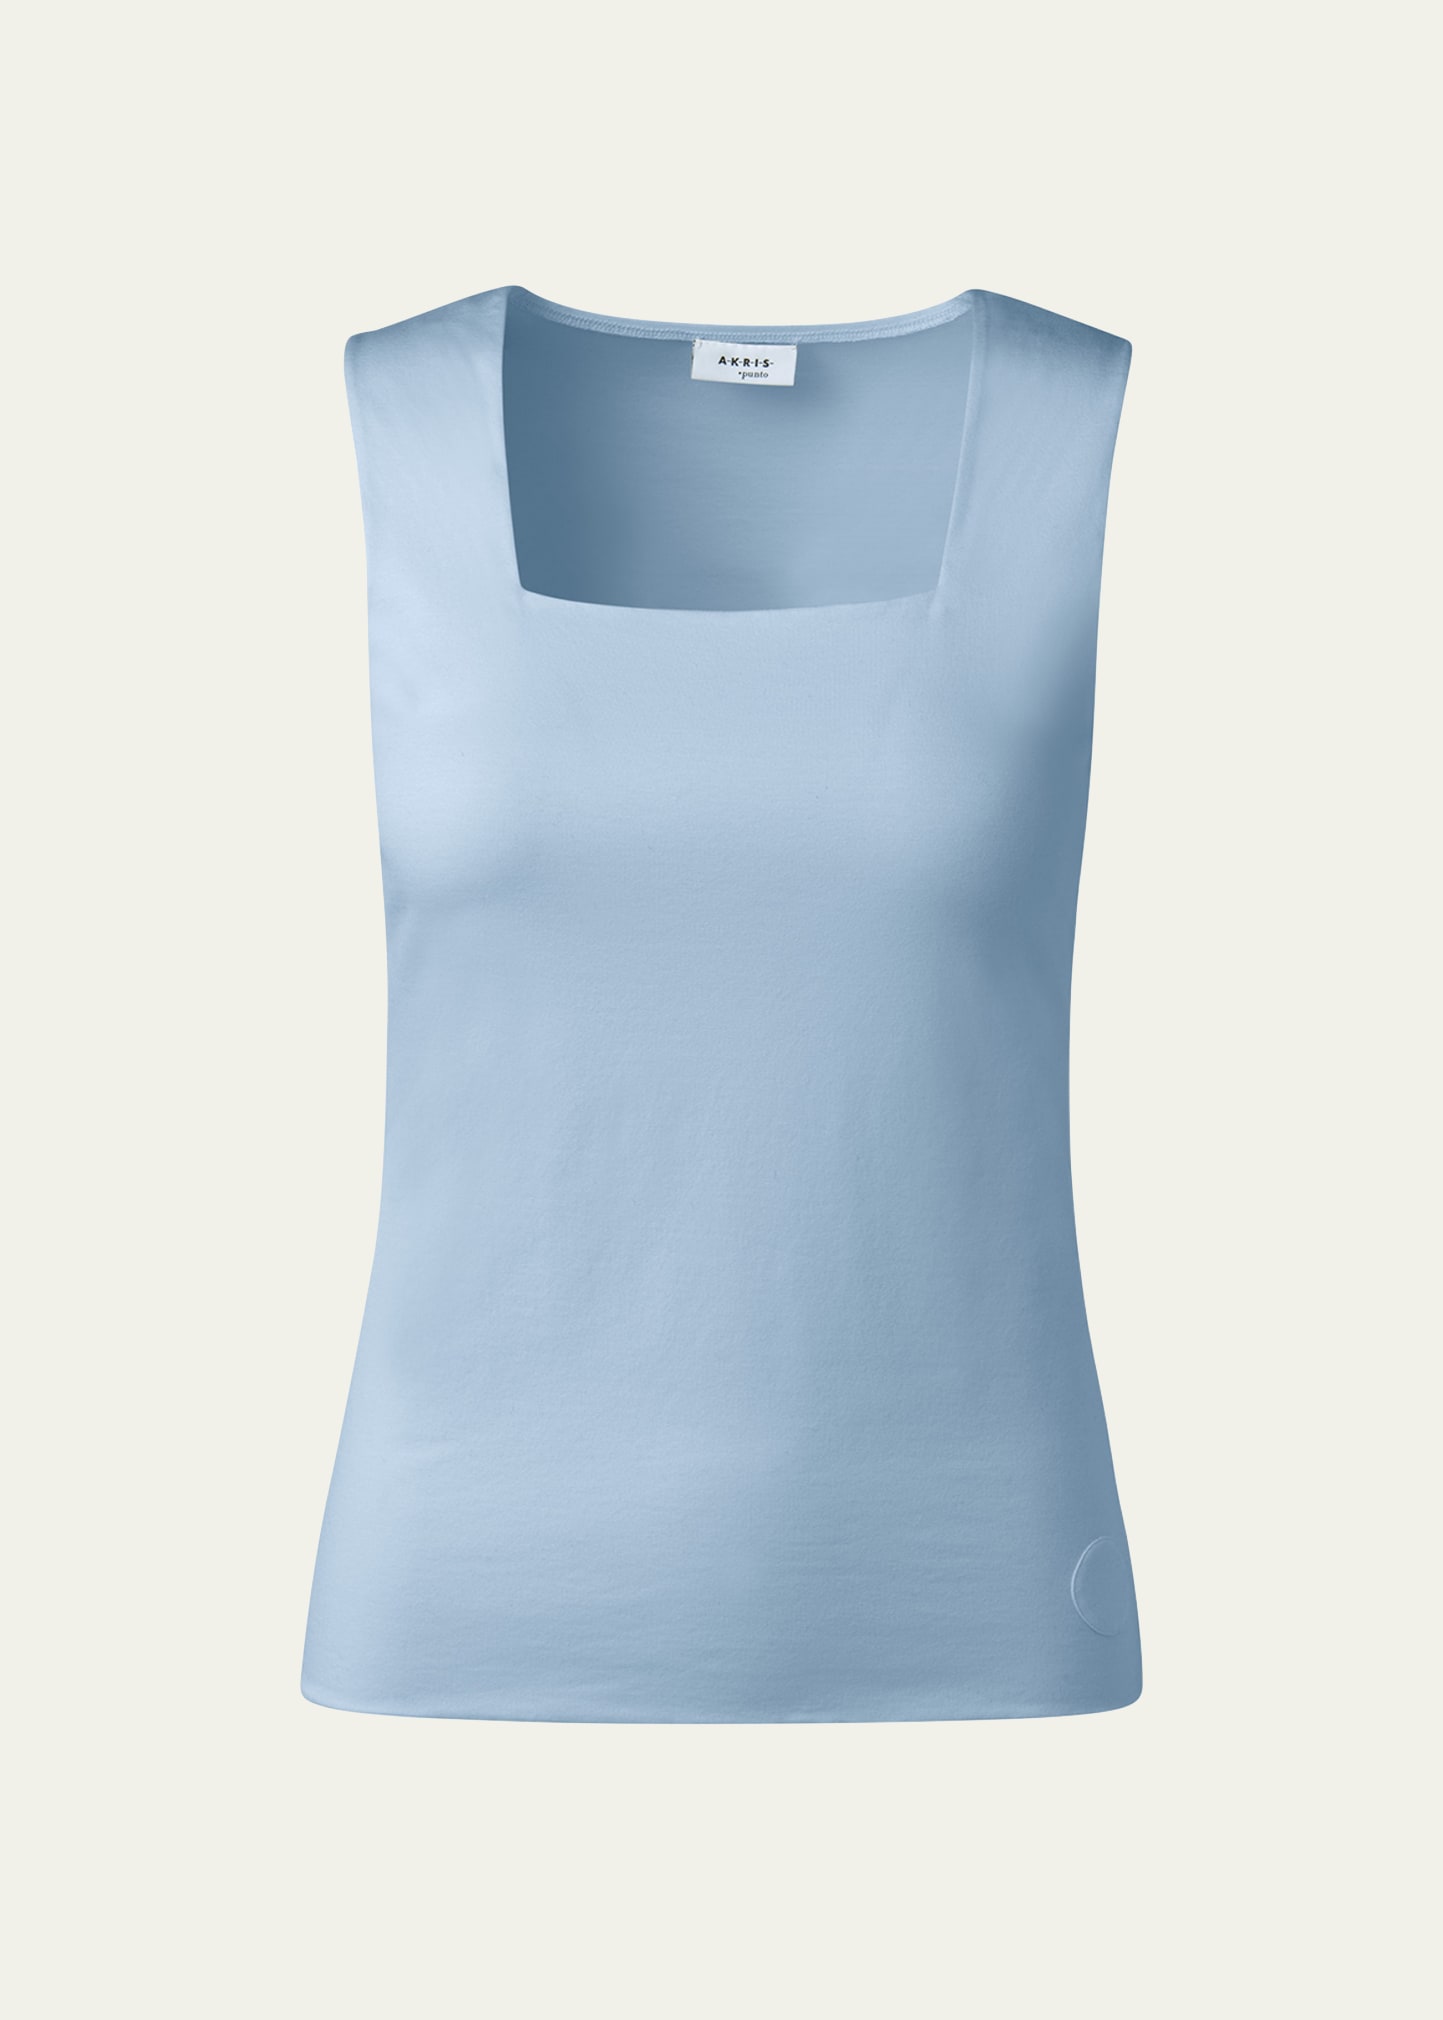 AKRIS PUNTO MODAL STRETCH FITTED TANK TOP